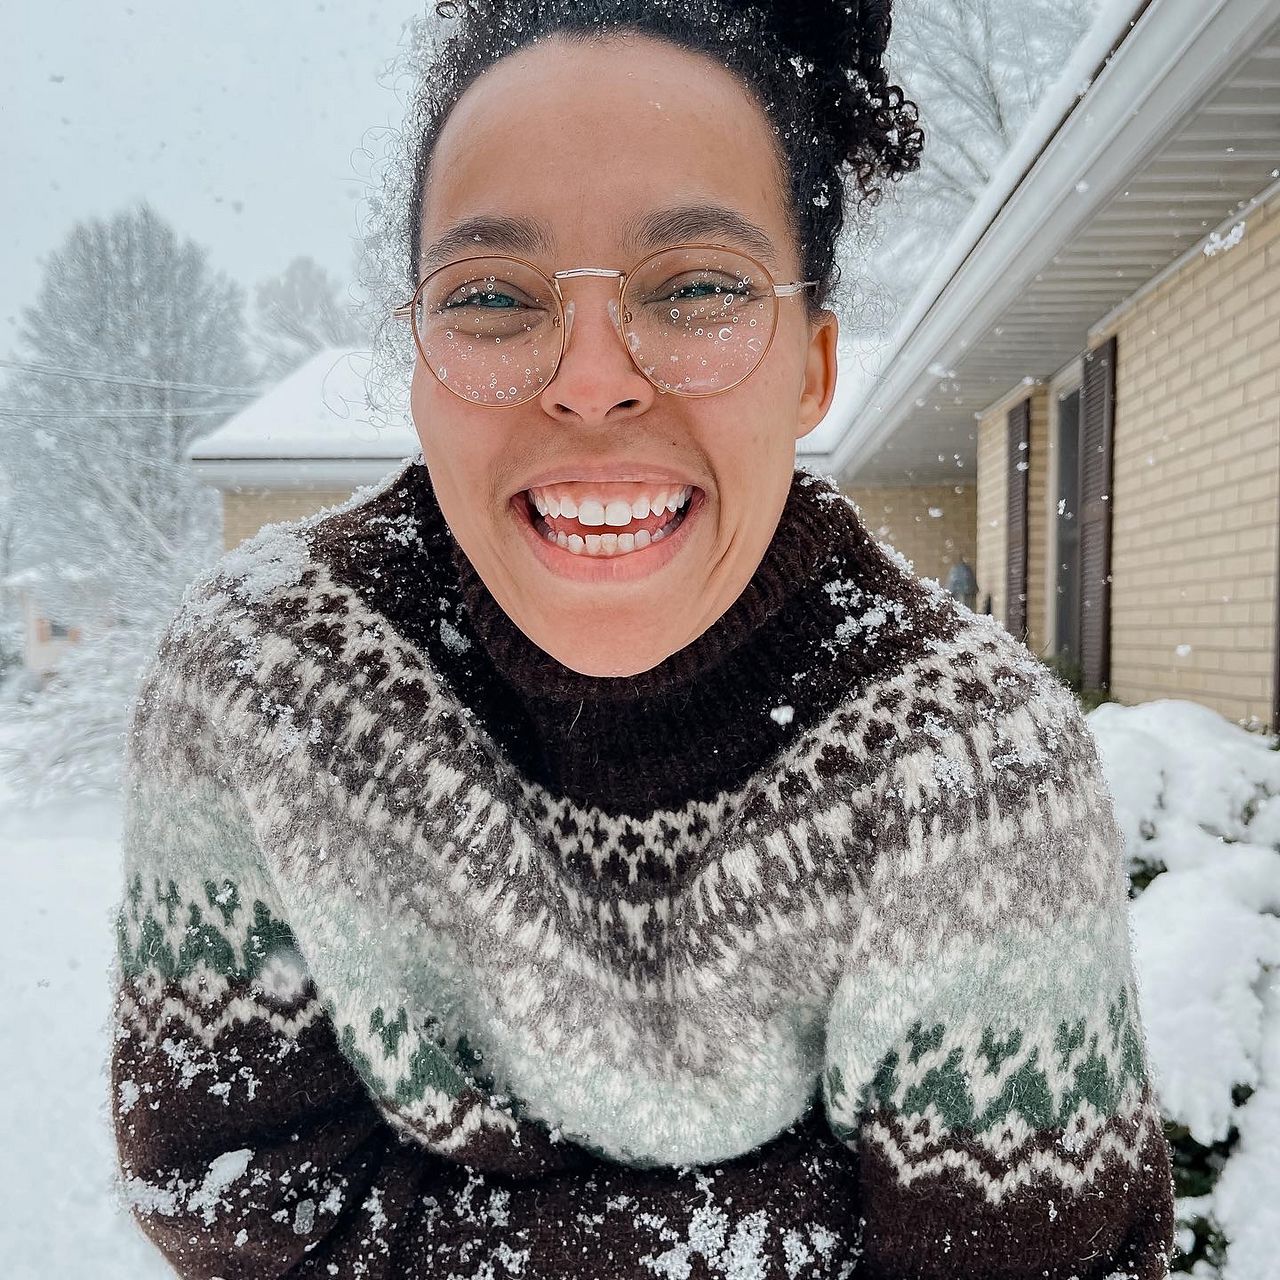 a woman stands in the snow, grinning at the camera, with snowflakes falling against her clothes, hair, and glasses. her sweater is stranded colorwork knitting with a yoke in shades of black, white, charcoal, light grey, mint, and dark aqua.